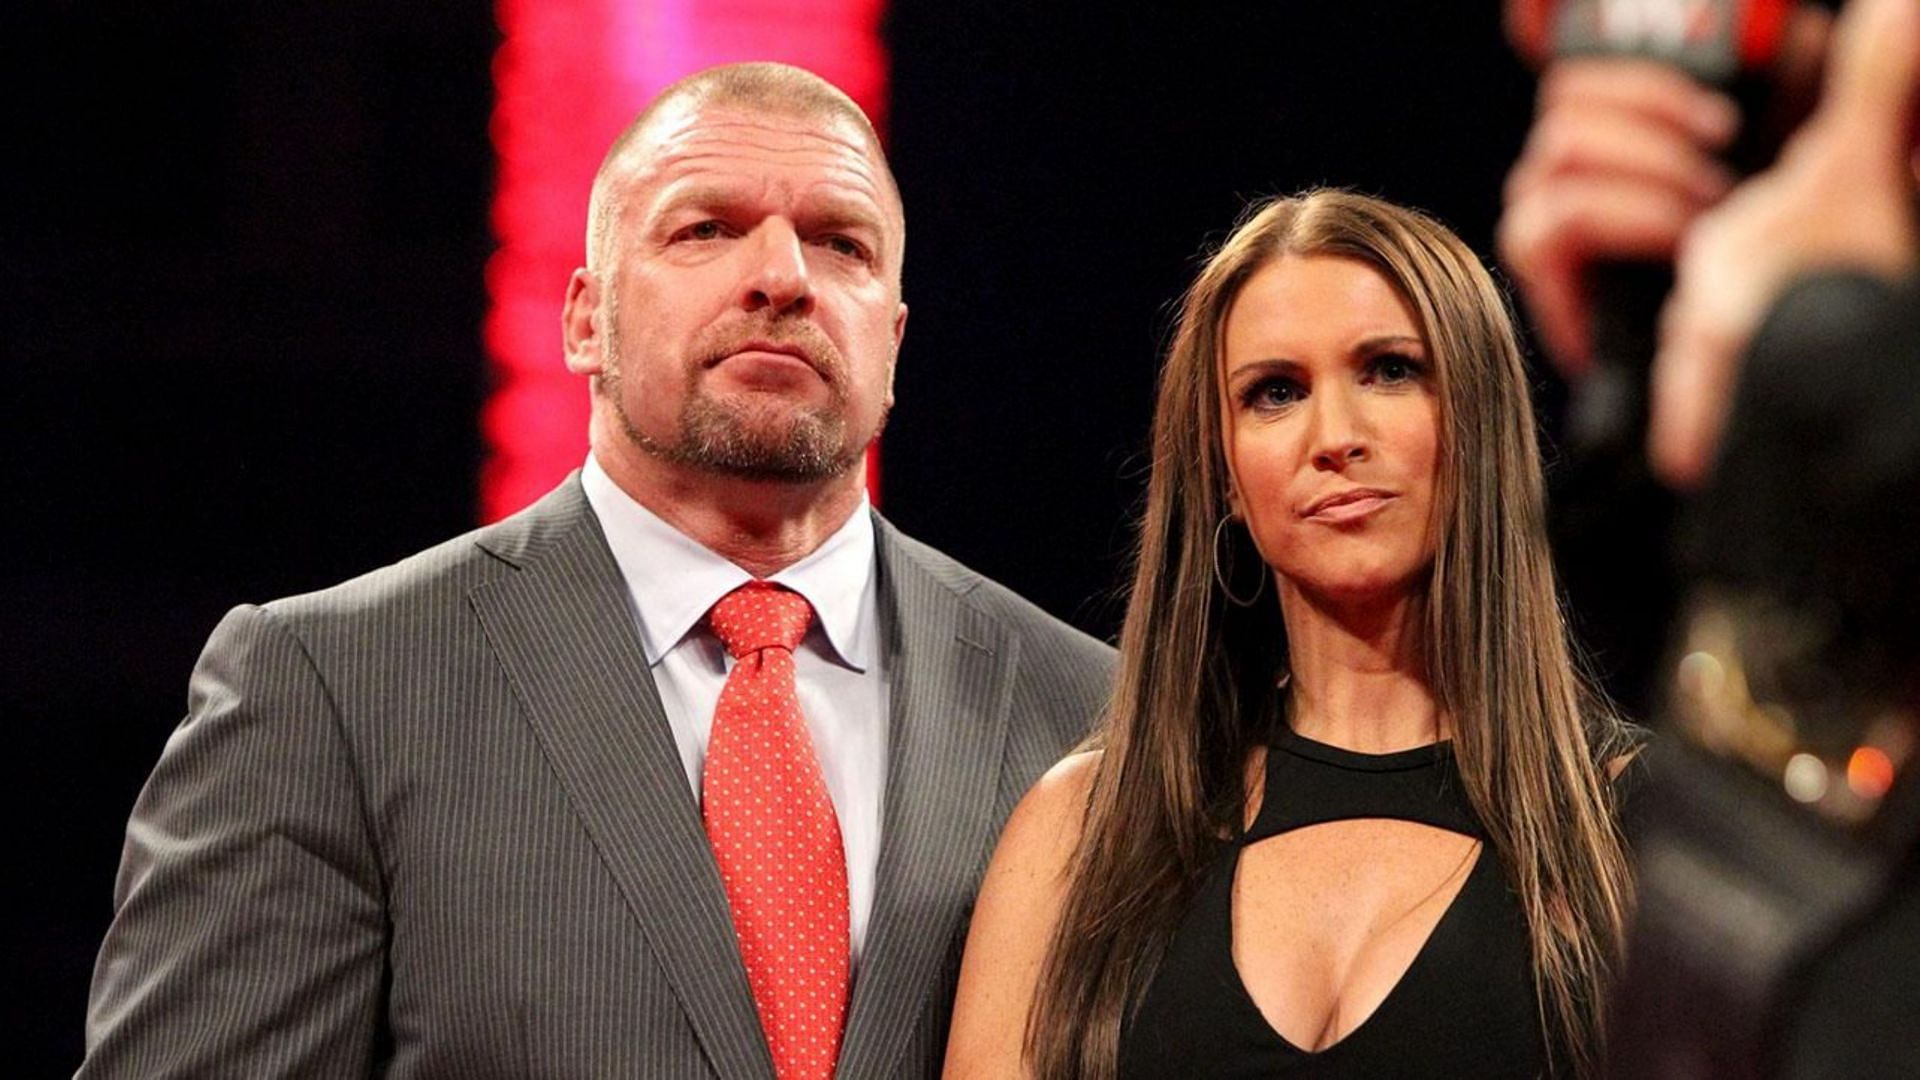 WWE CCO Triple H and Co-CEO Stephanie McMahon had their first kiss at the 2000 Royal Rumble